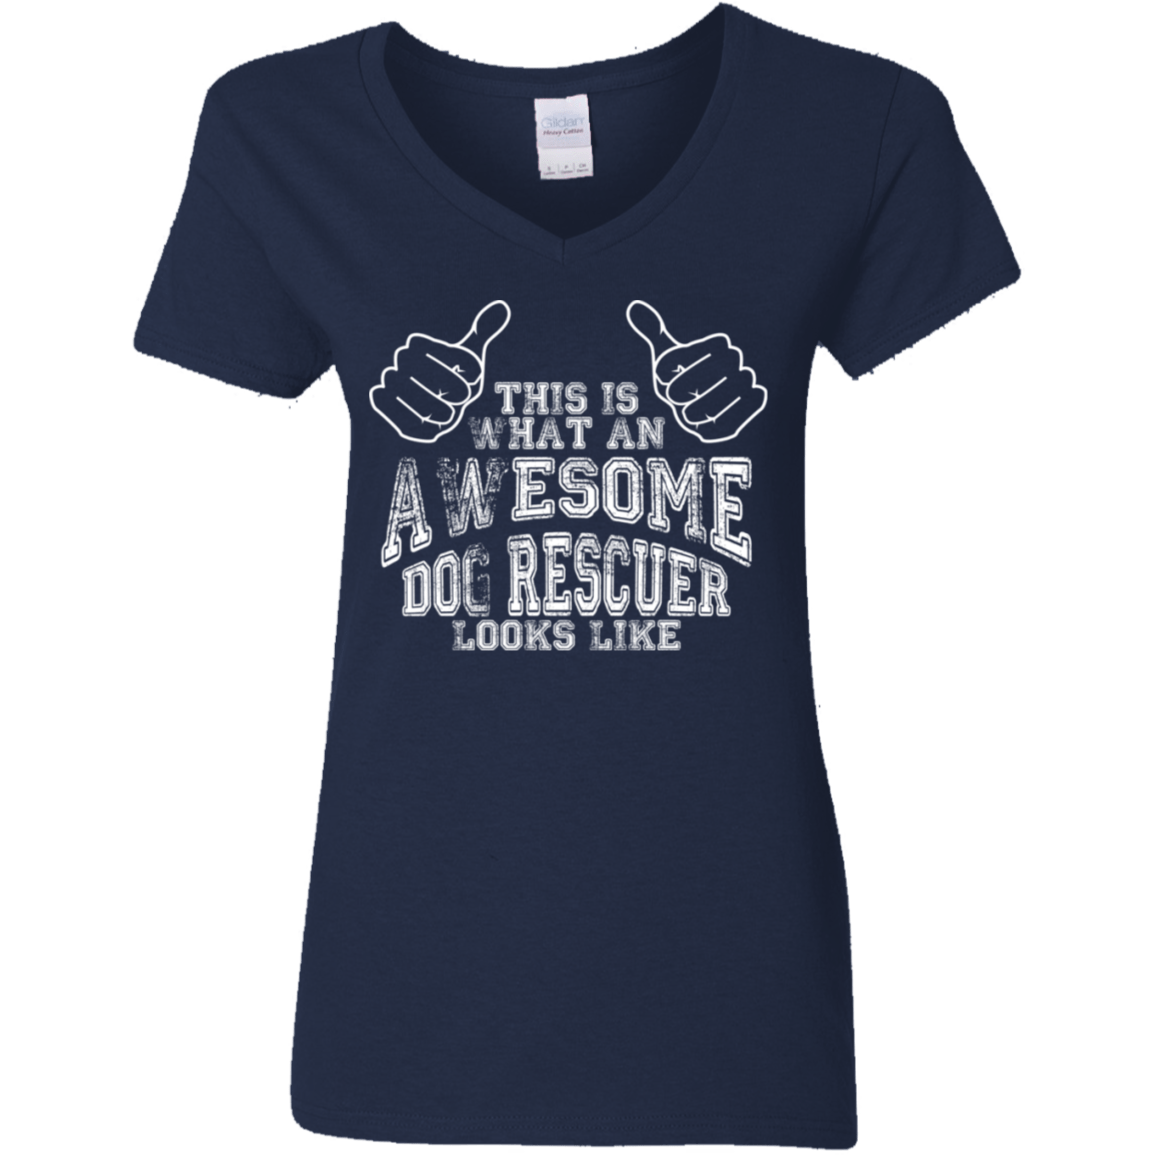 Awesome Dog Rescuer - Ladies V Neck.